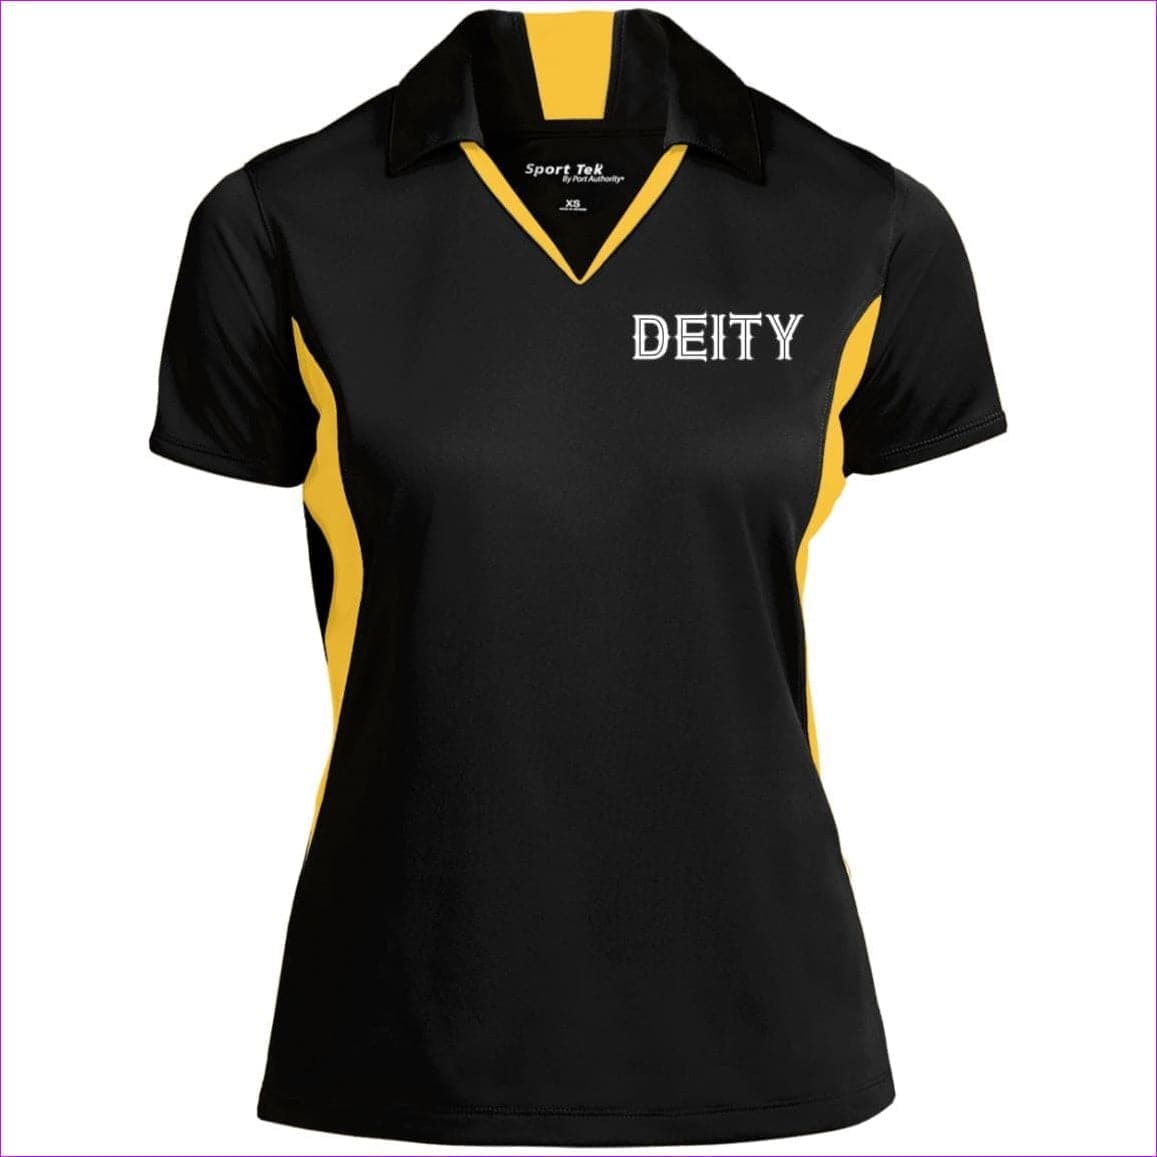 Black Gold - Deity Ladies' Colorblock Performance Polo - Womens Polo Shirts at TFC&H Co.